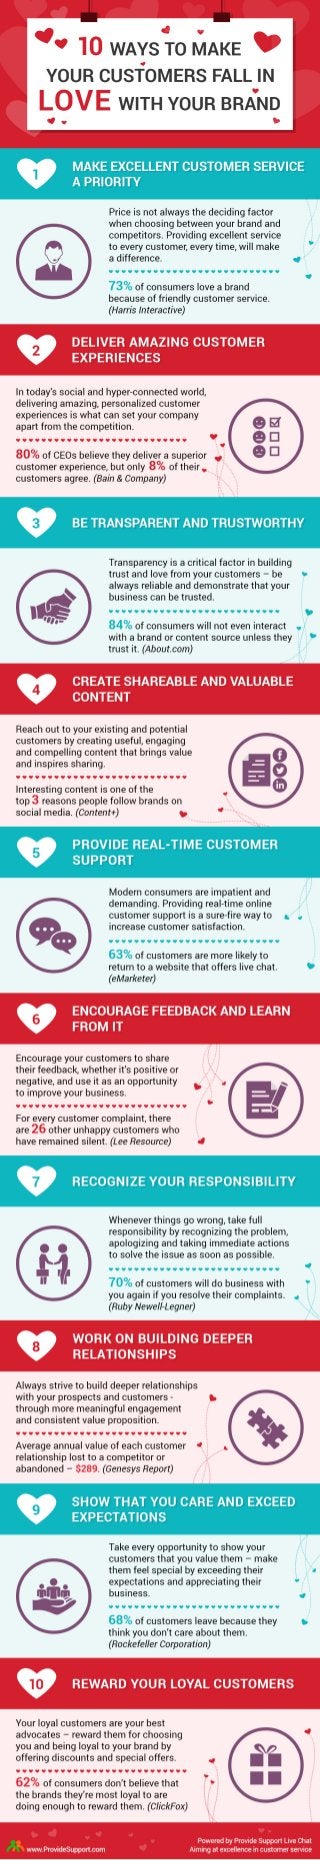 10 Ways To Make Your Customers Fall In Love With Your Brand (Infographic)